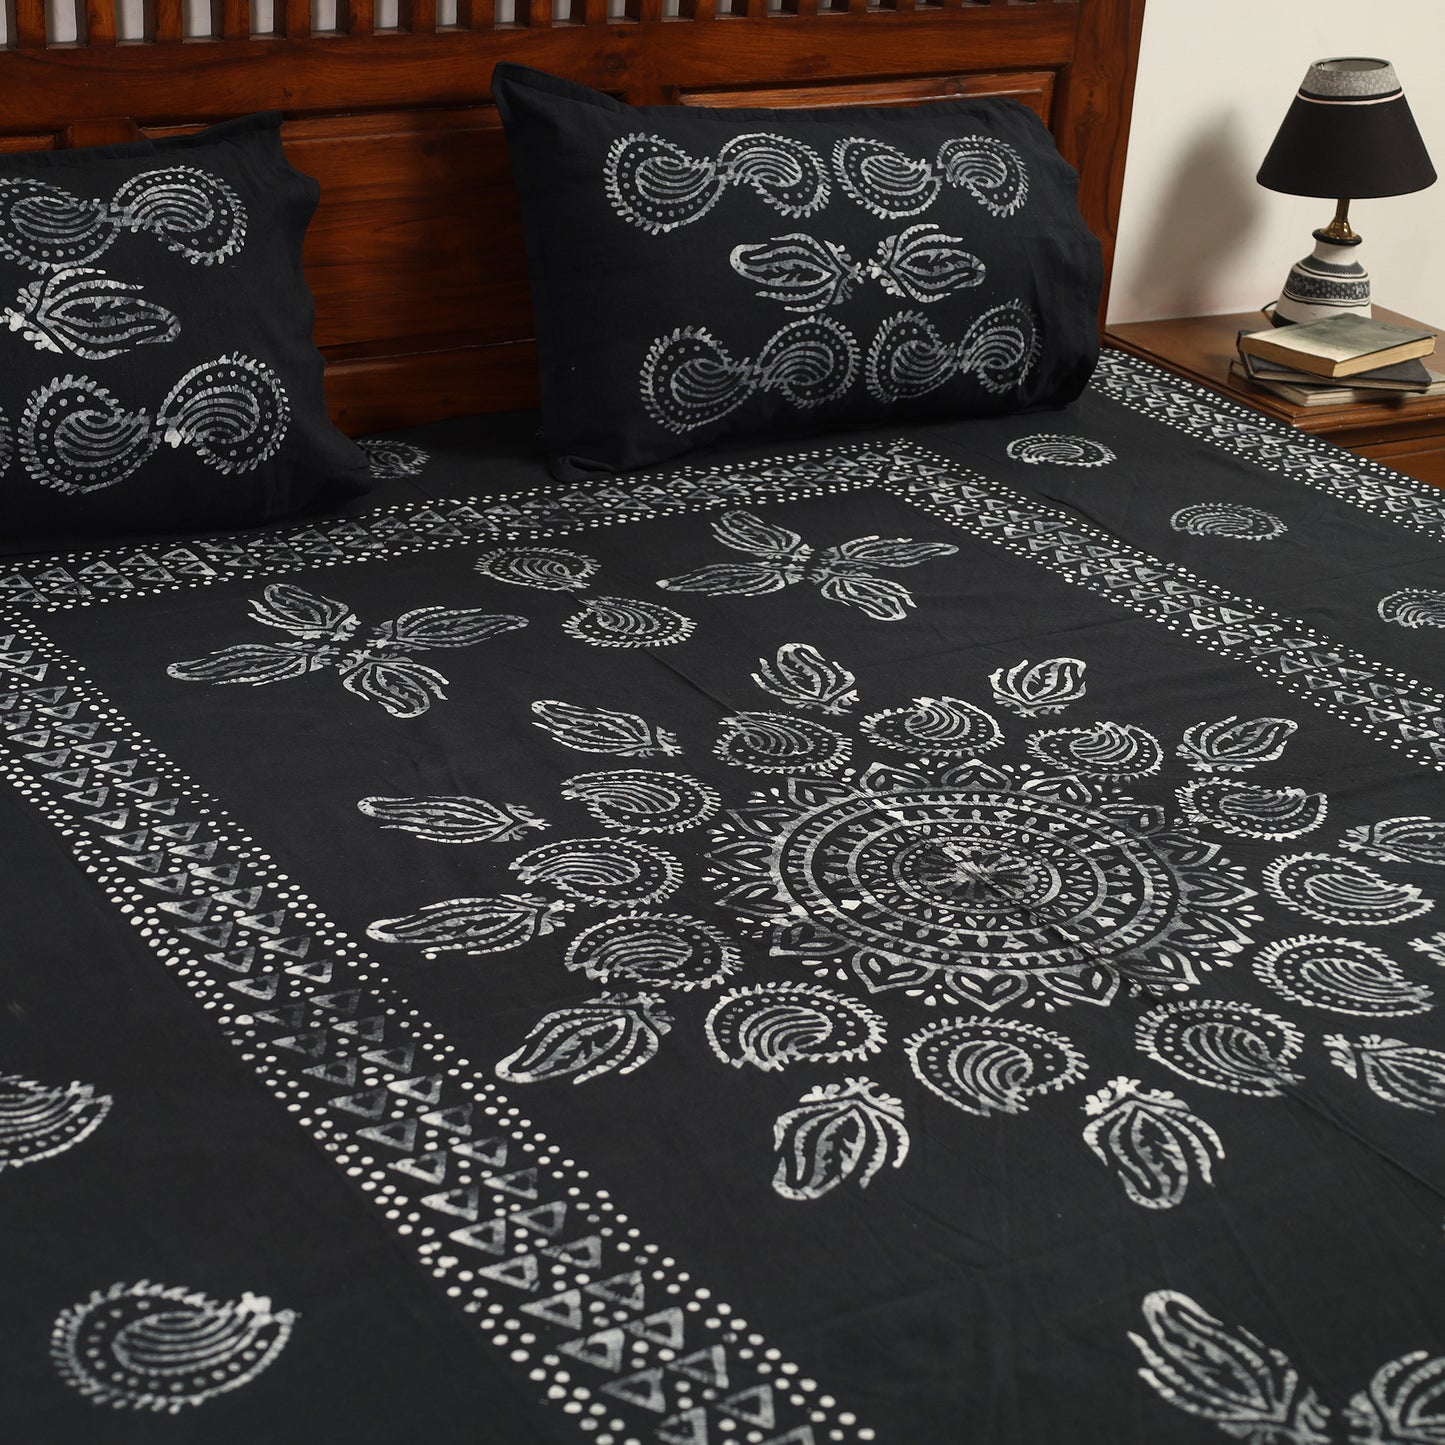 Black - Hand Batik Printed Cotton Double Bed Cover with Pillow Covers (108 x 90 in) 09